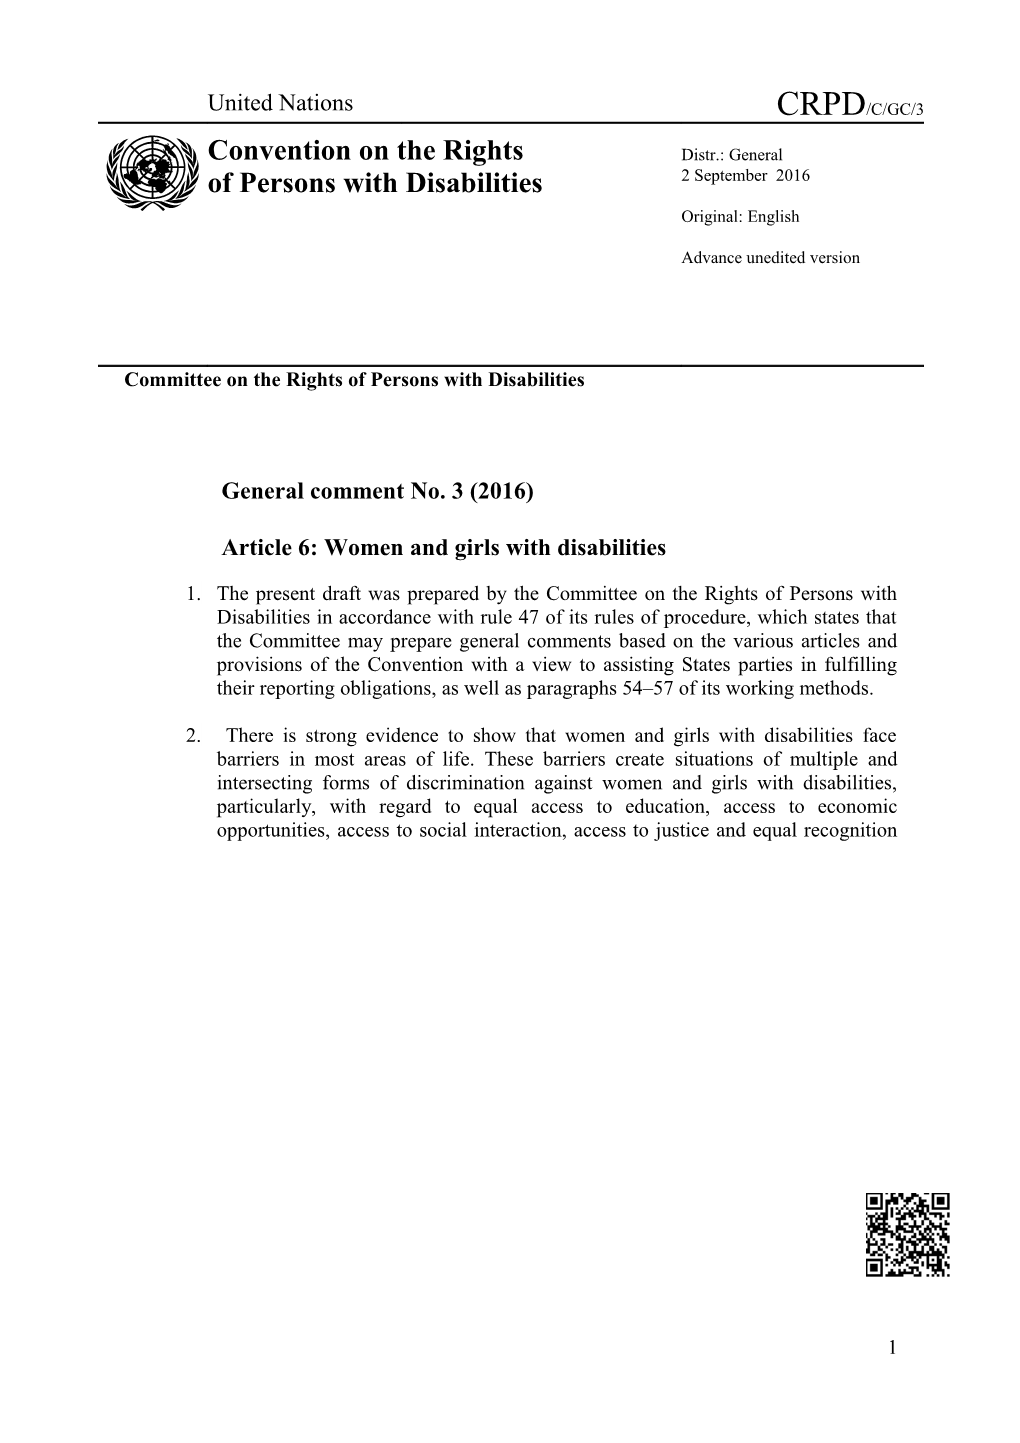 Article 6: Women and Girls with Disabilities